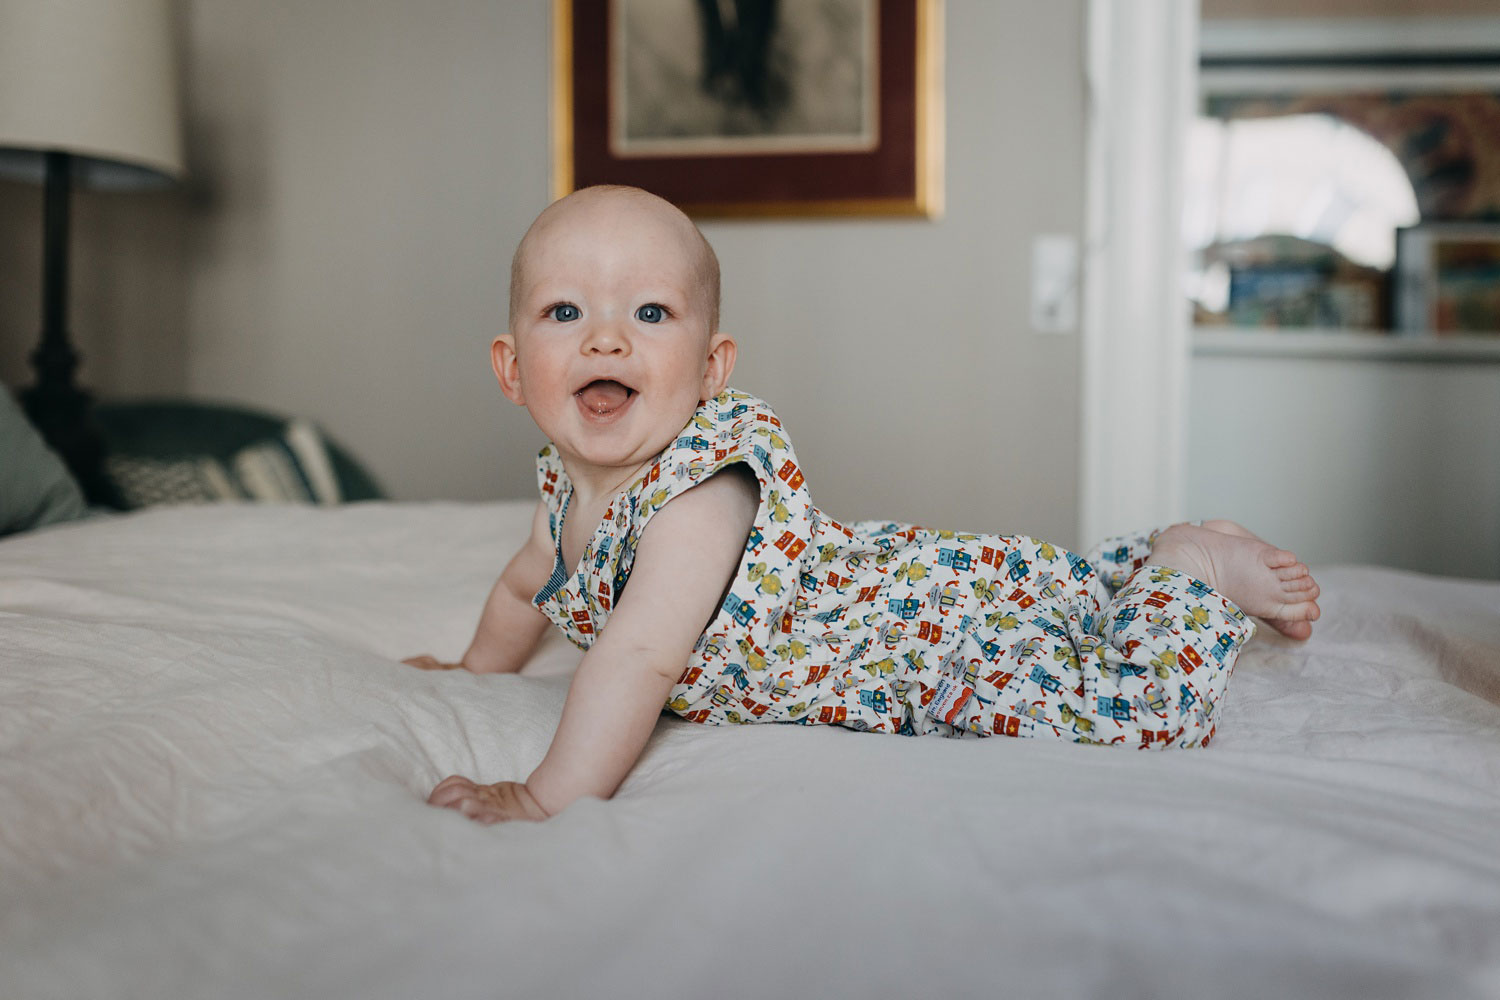 Sweet 6-month-old baby giggling during a playful photoshoot at their Copenhagen home